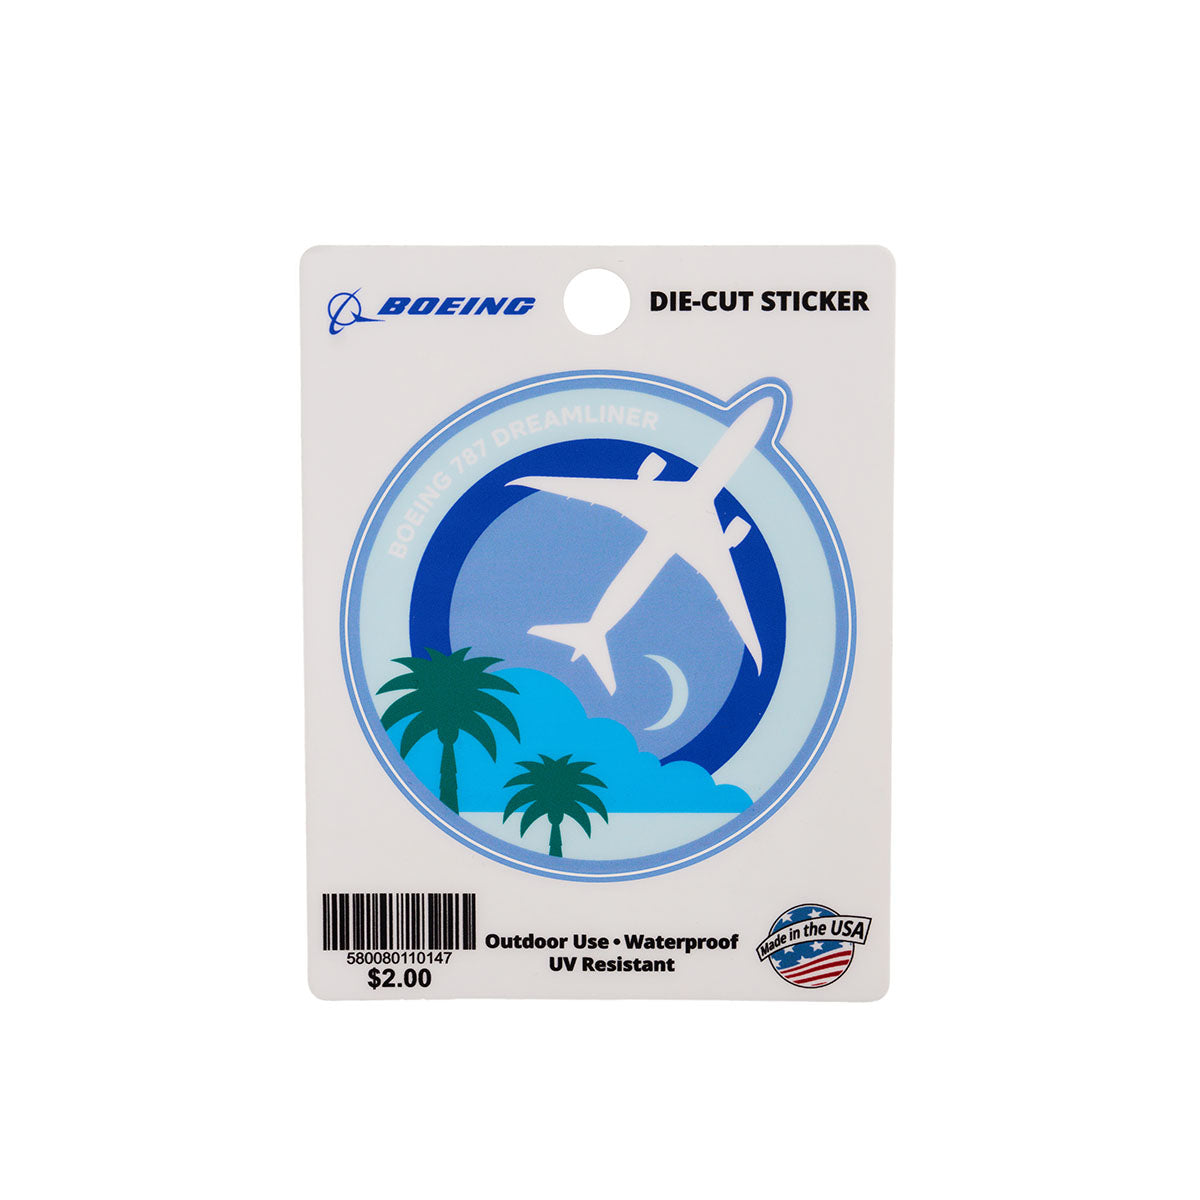 Skyward sticker, featuring the iconic Boeing Boeing 787 Dreamliner in a roundel design.